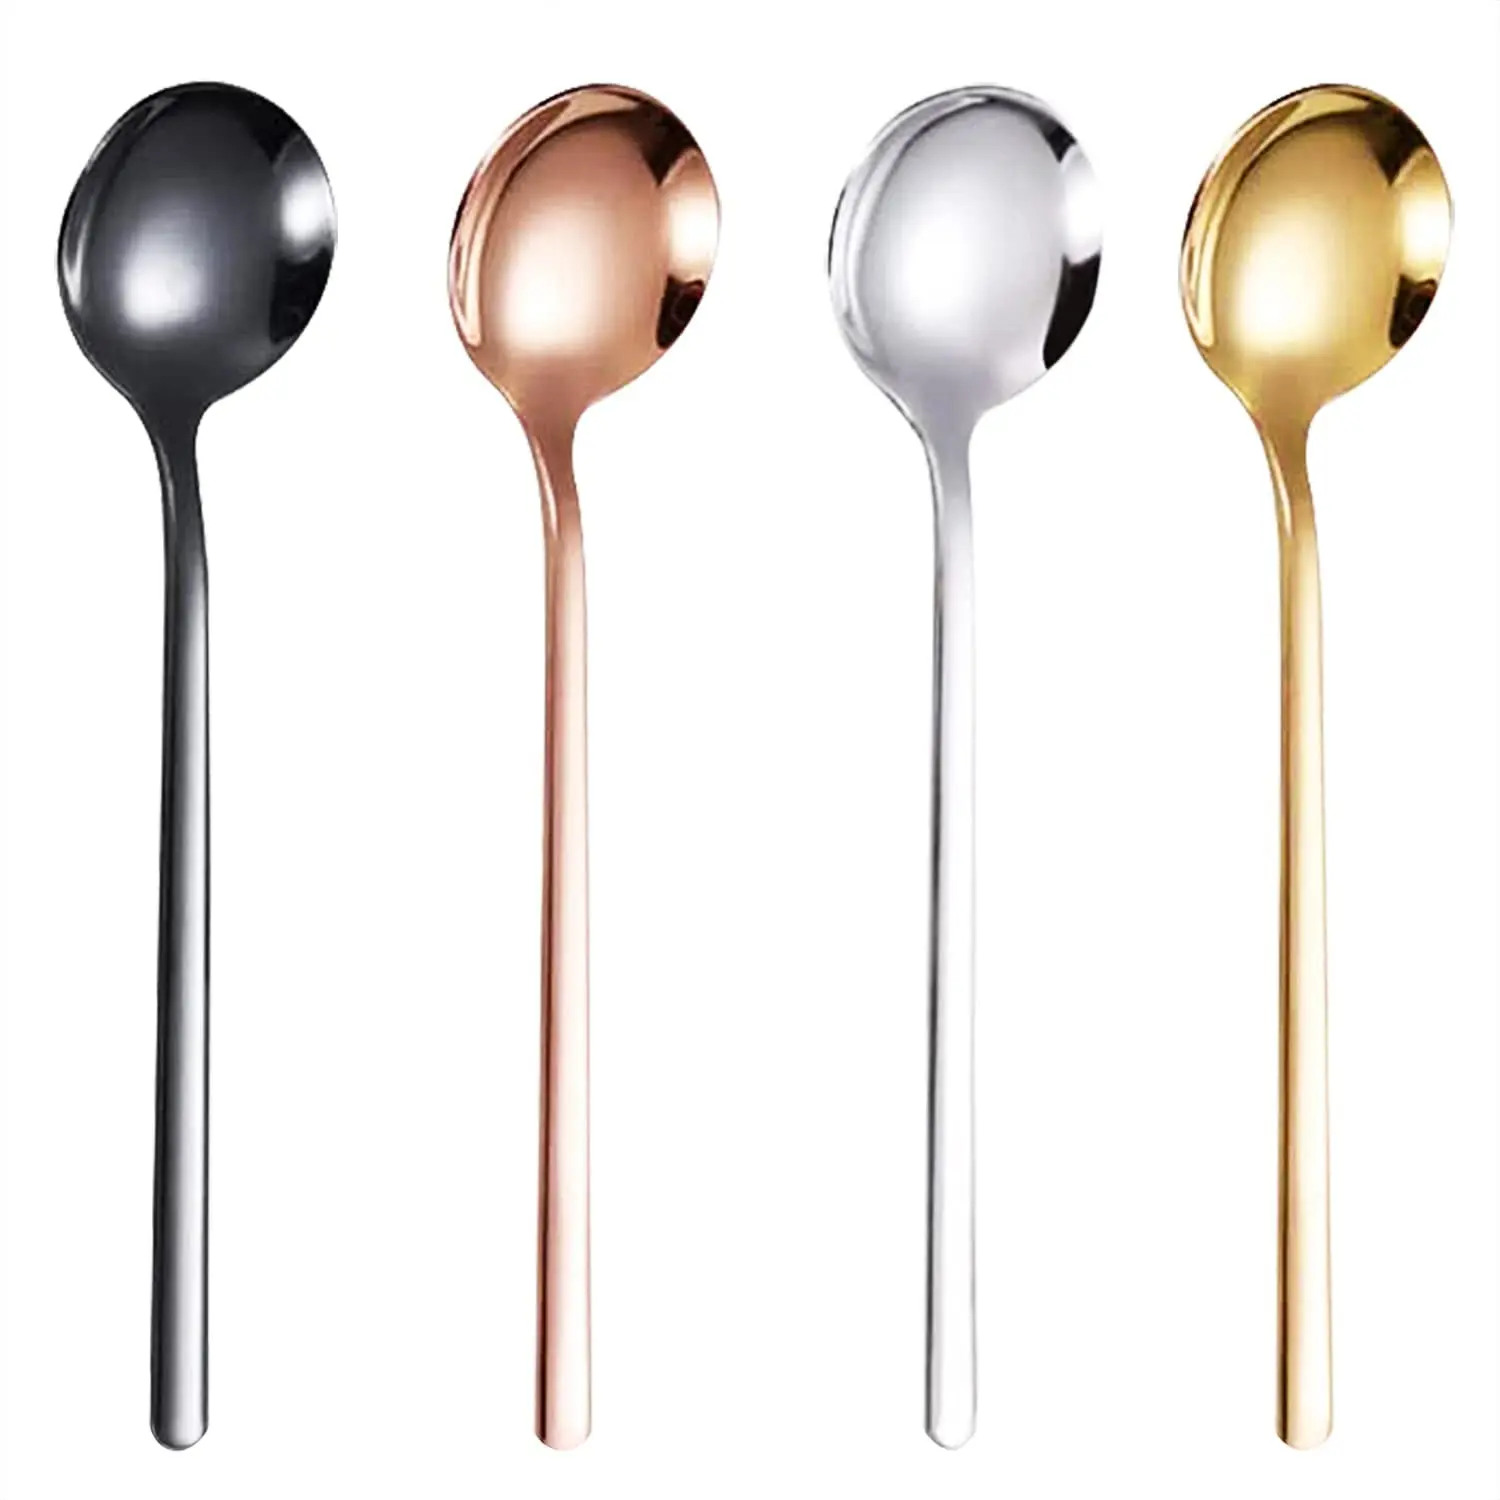 

QZQ Long Handle Korean Style Ice Scoop Dessert Stirring Gold Stainless Steel Cupping Coffee Tea Spoon, Silver, gold, rose gold, black